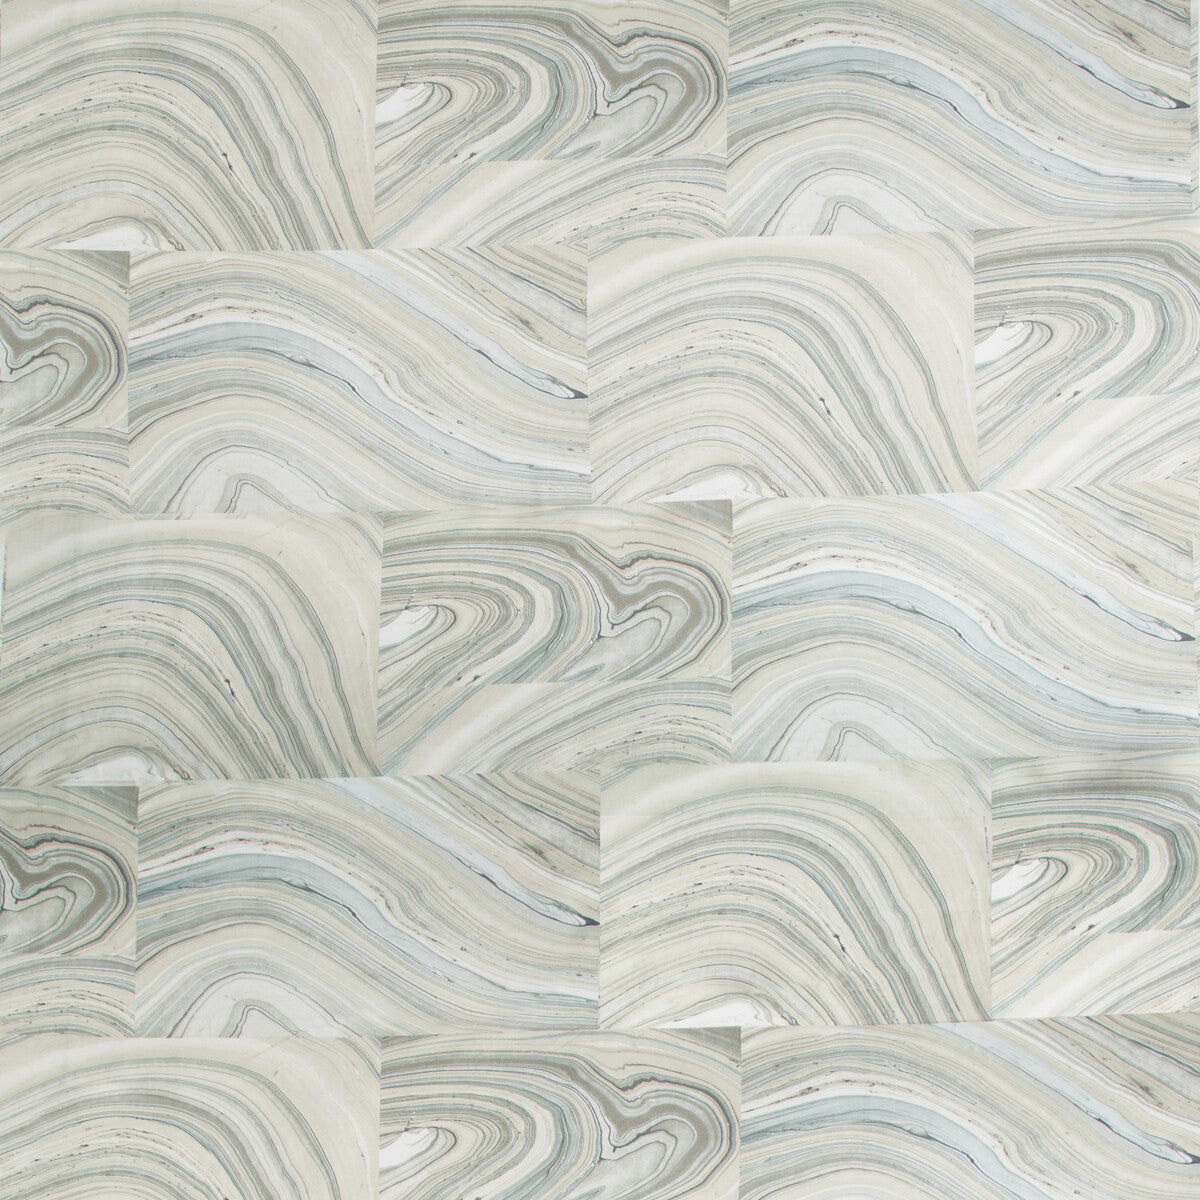 Marblework fabric in limestone color - pattern MARBLEWORK.1611.0 - by Kravet Design in the Candice Olson collection